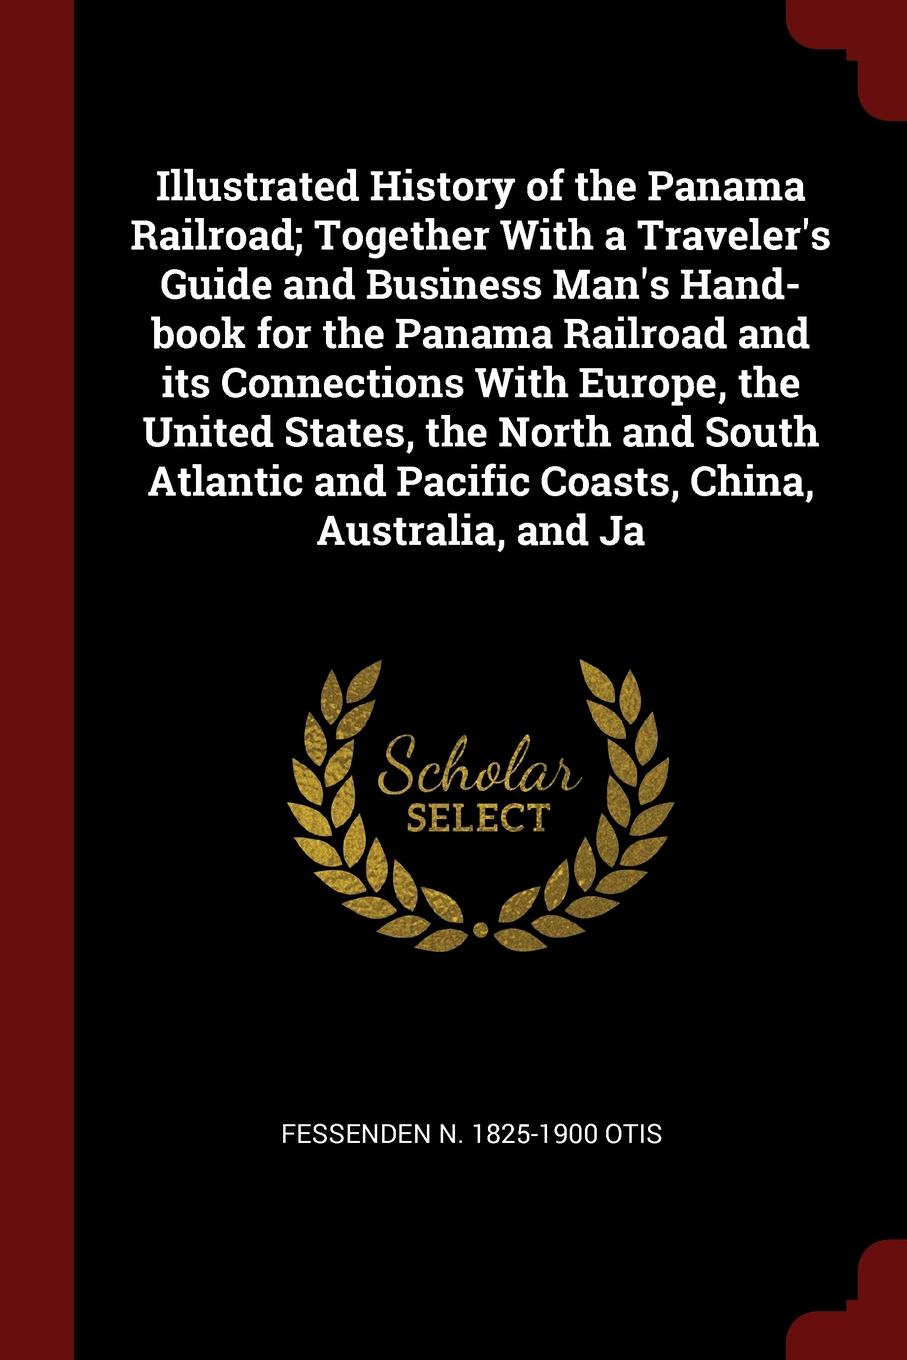 Illustrated History of the Panama Railroad; Together With a Traveler`s Guide and Business Man`s Hand-book for the Panama Railroad and its Connections With Europe, the United States, the North and South Atlantic and Pacific Coasts, China, Australia...